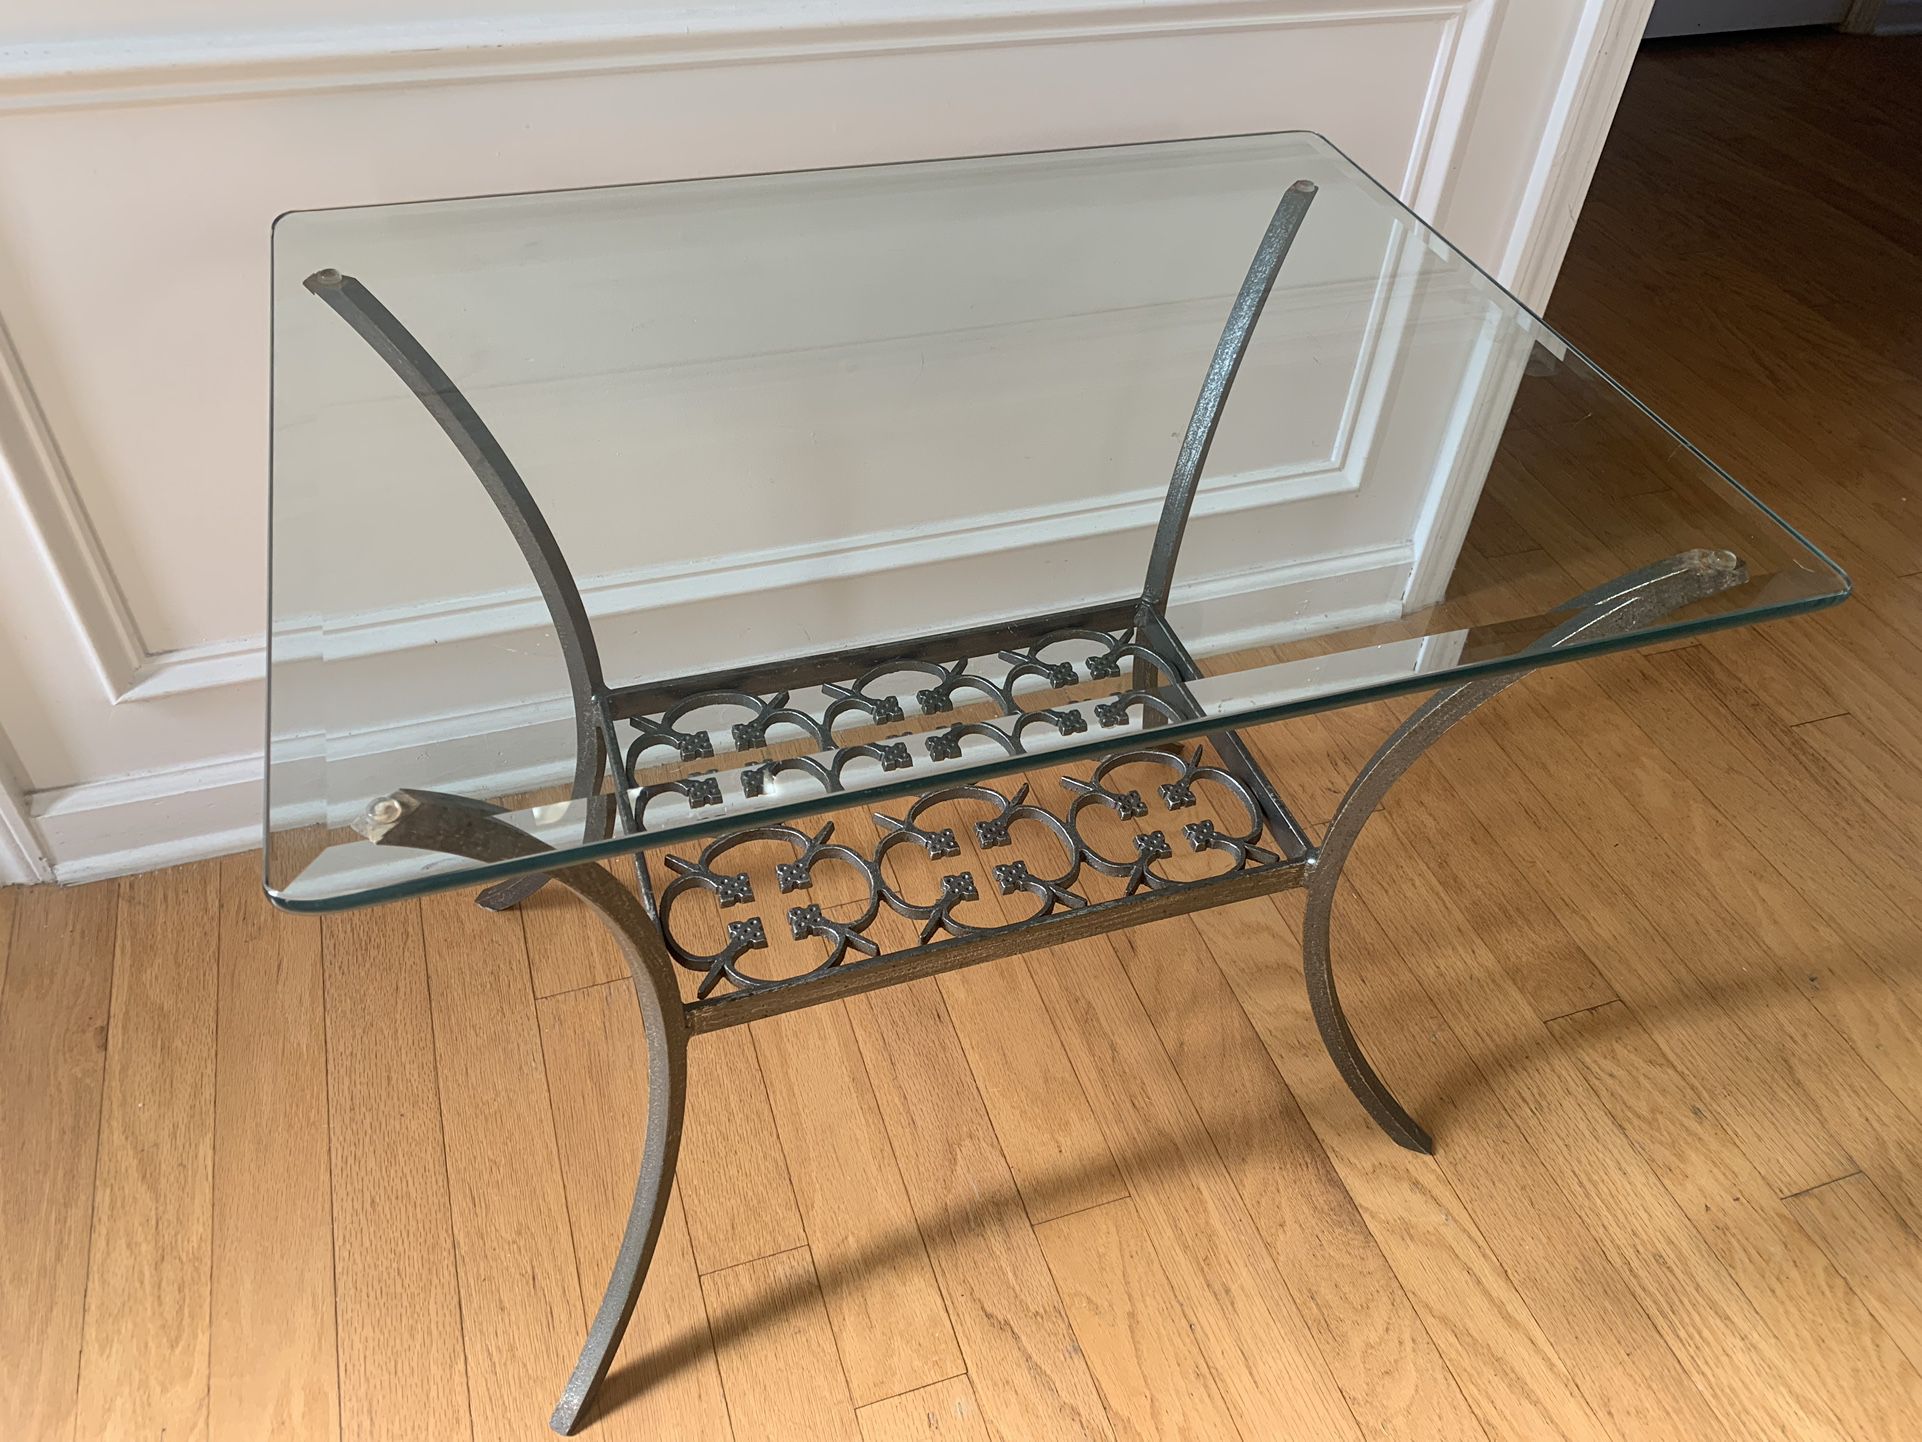 Ornate Metal and Glass Table - 28x22”